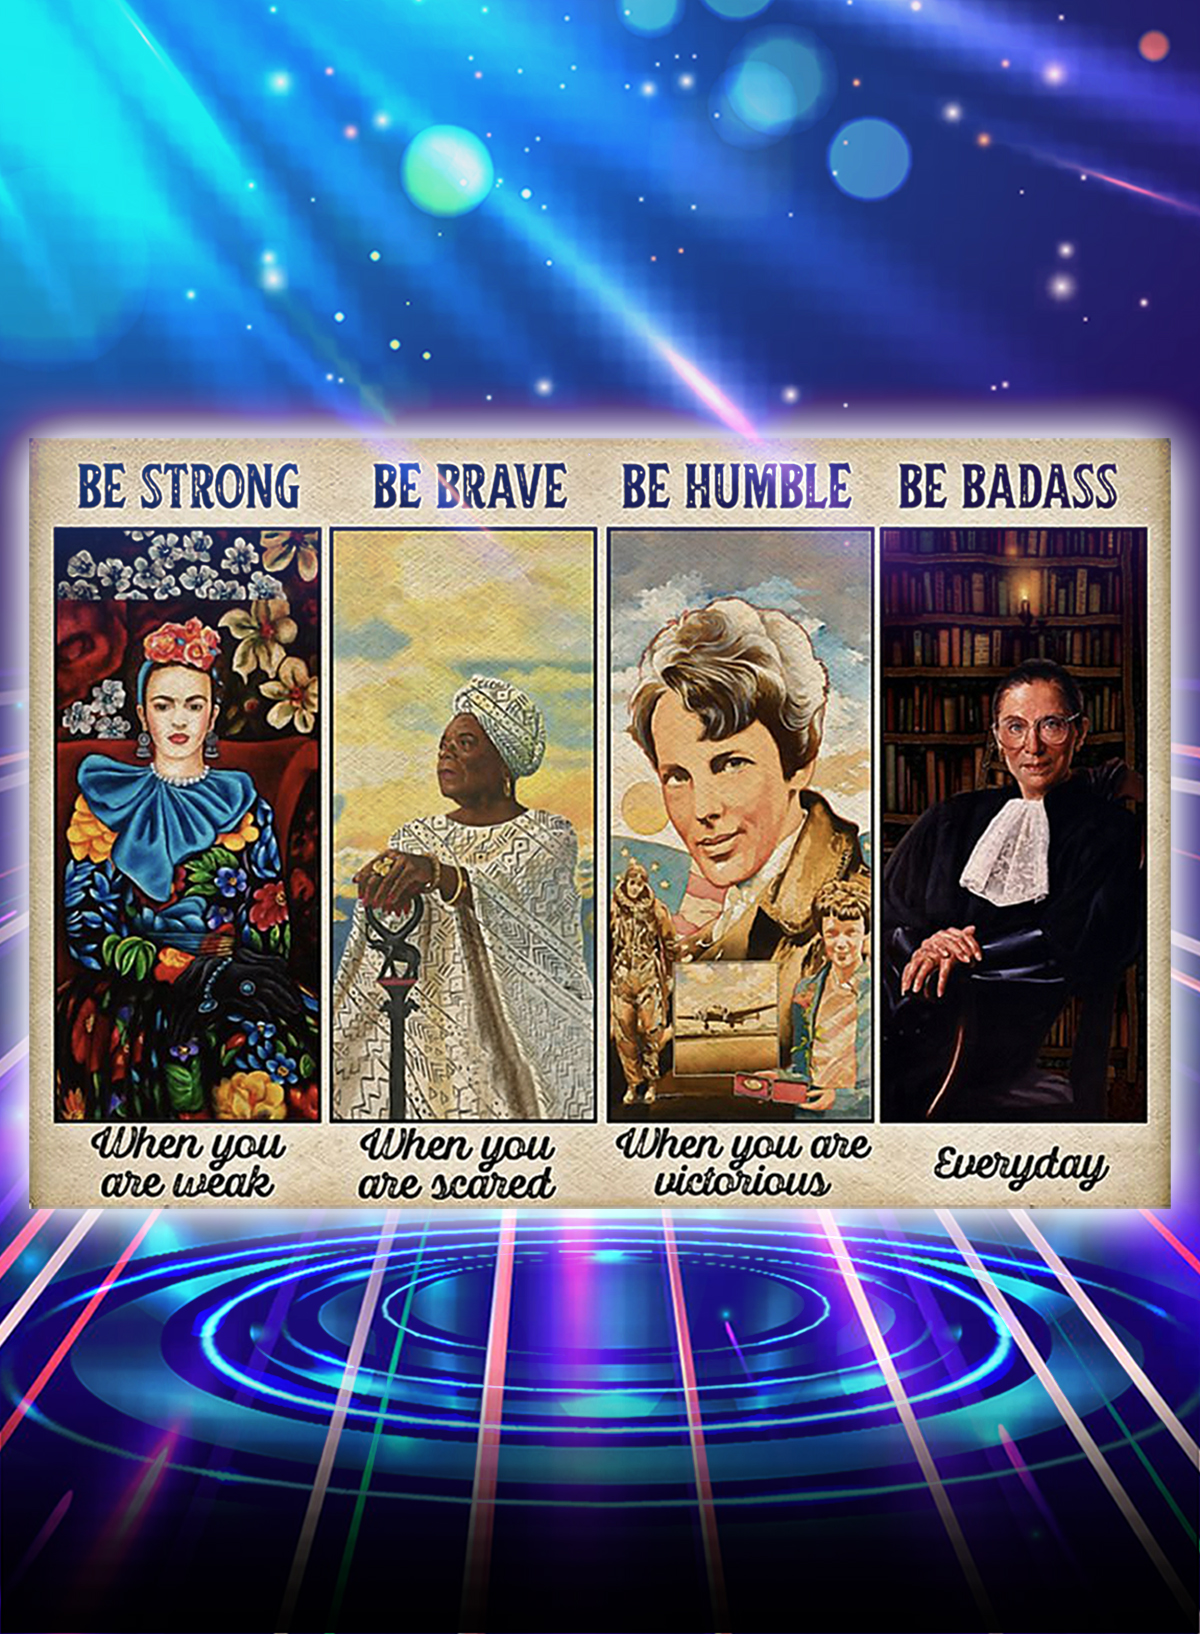 Feminist Frida Kahlo RBG be strong be brave be humble be badass poster - A1